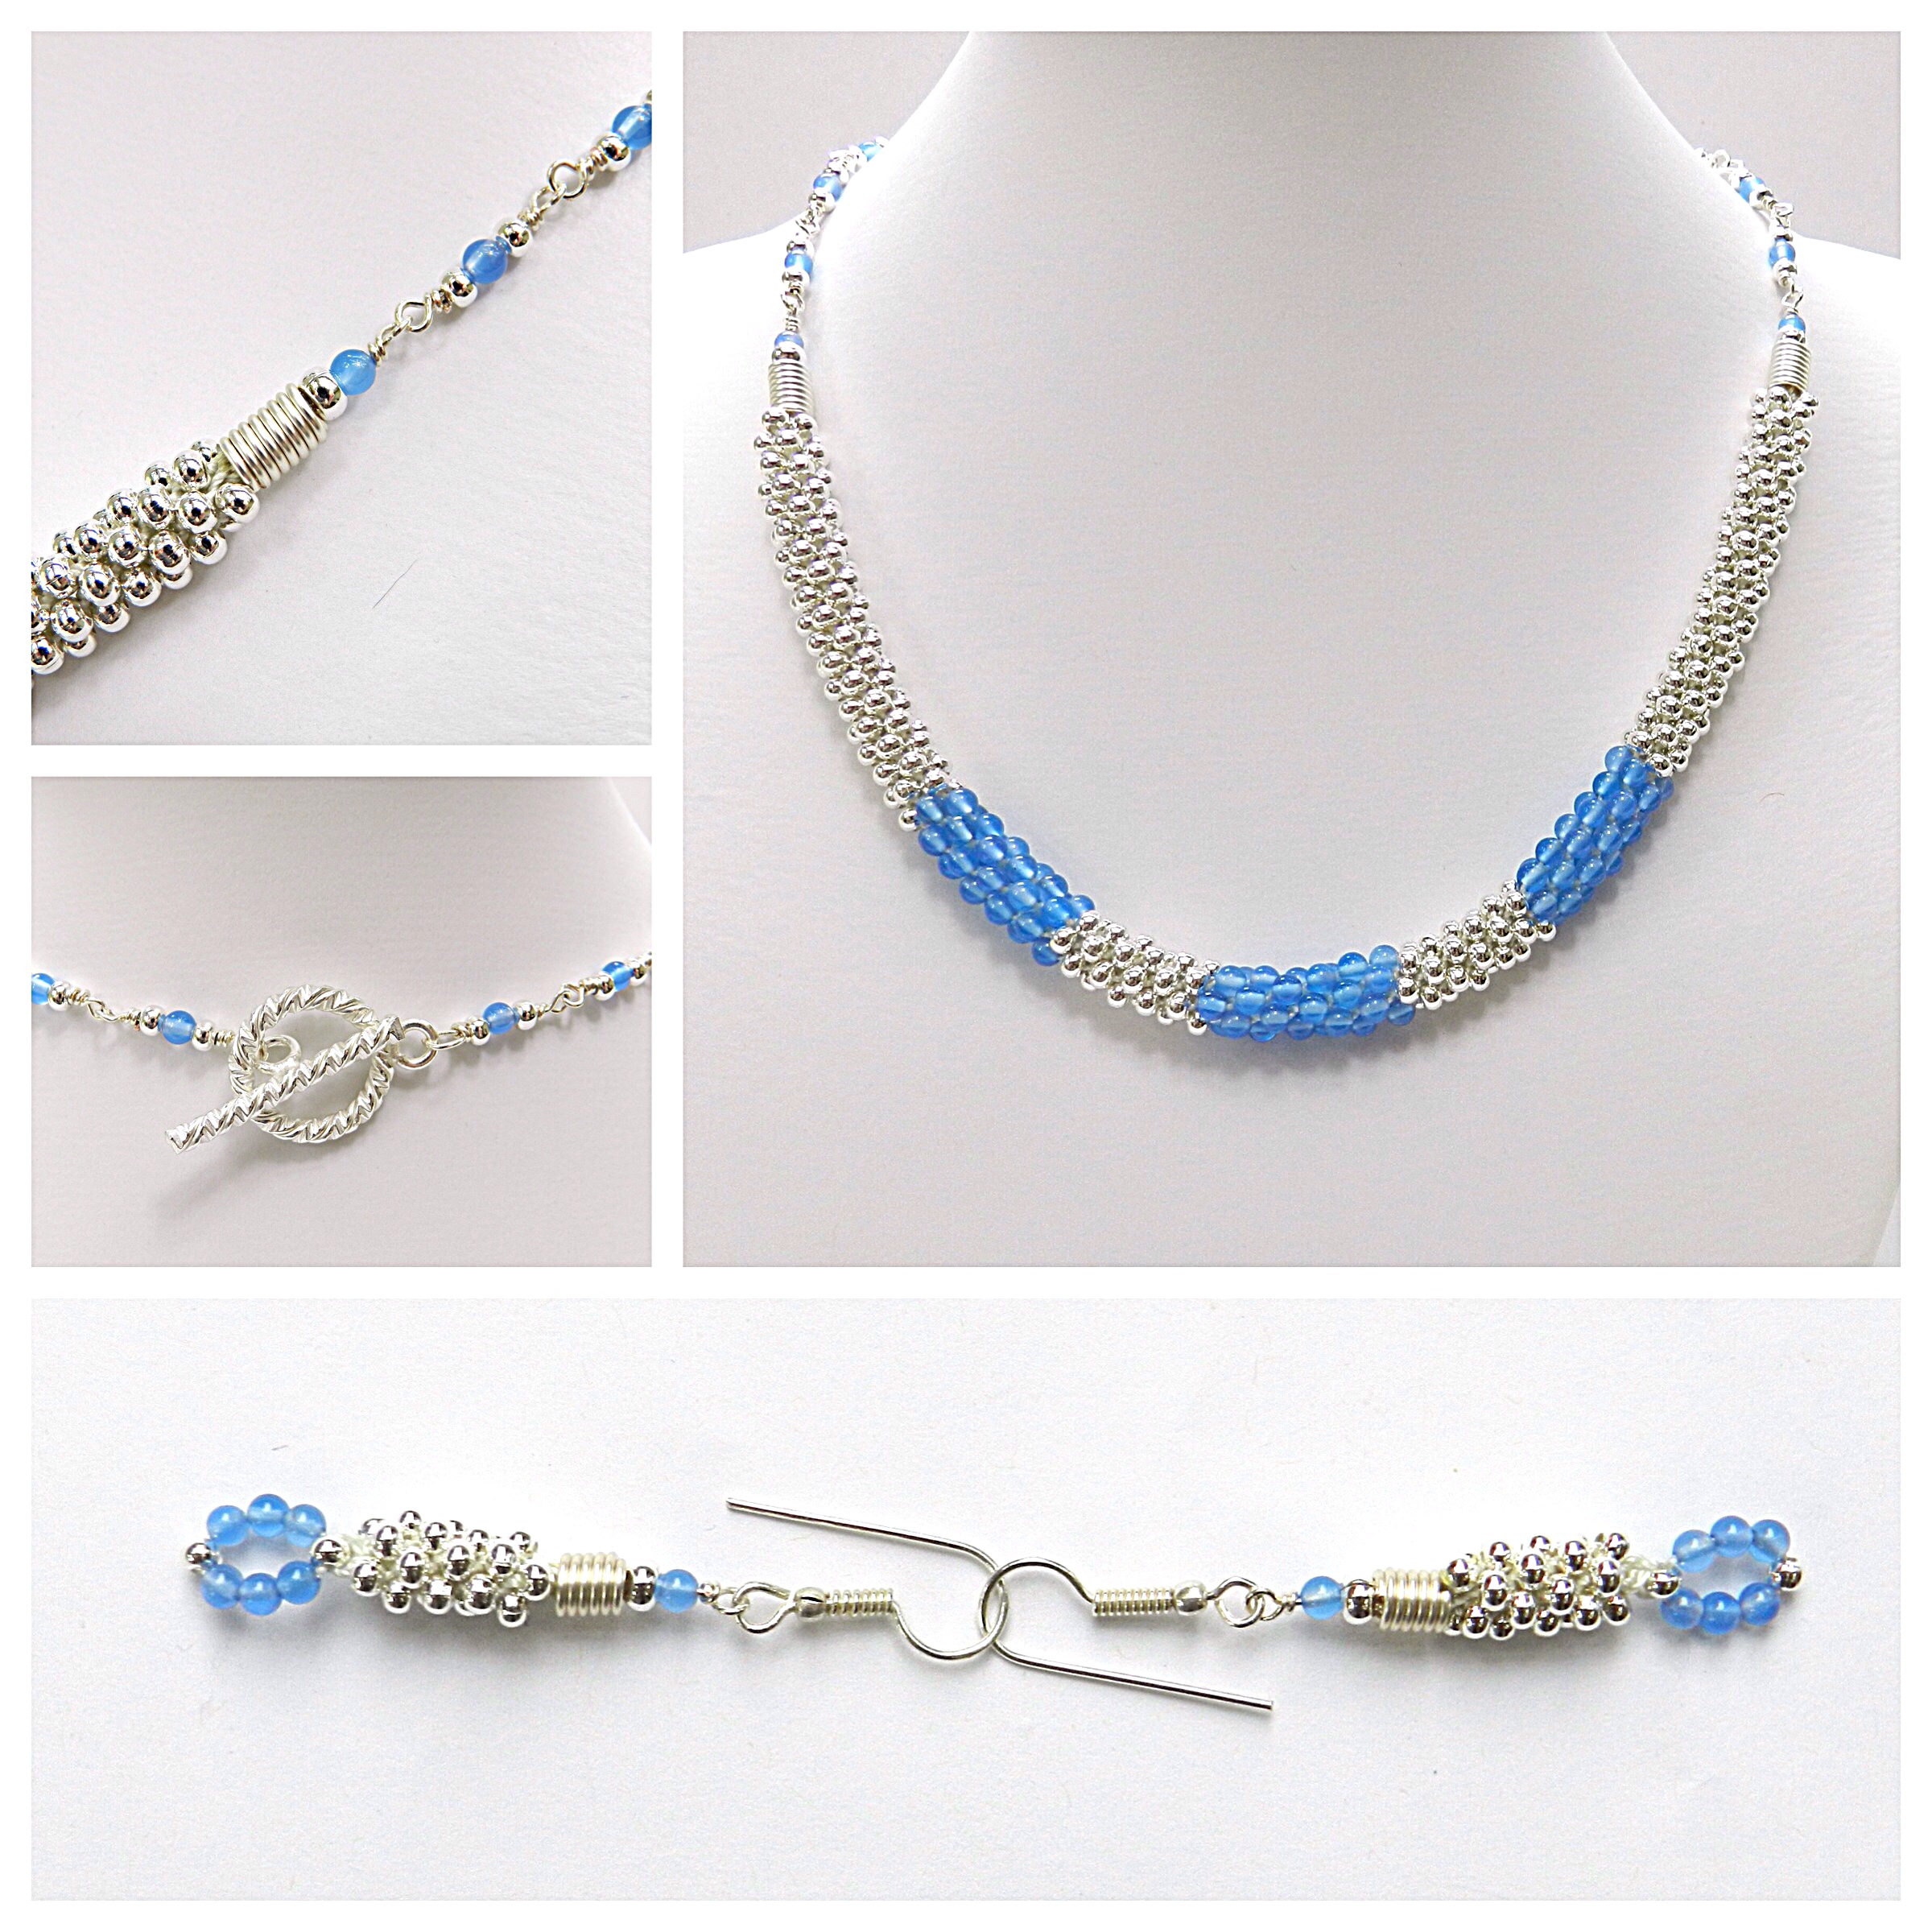 Kumihimo with metal seed beads and blue agate